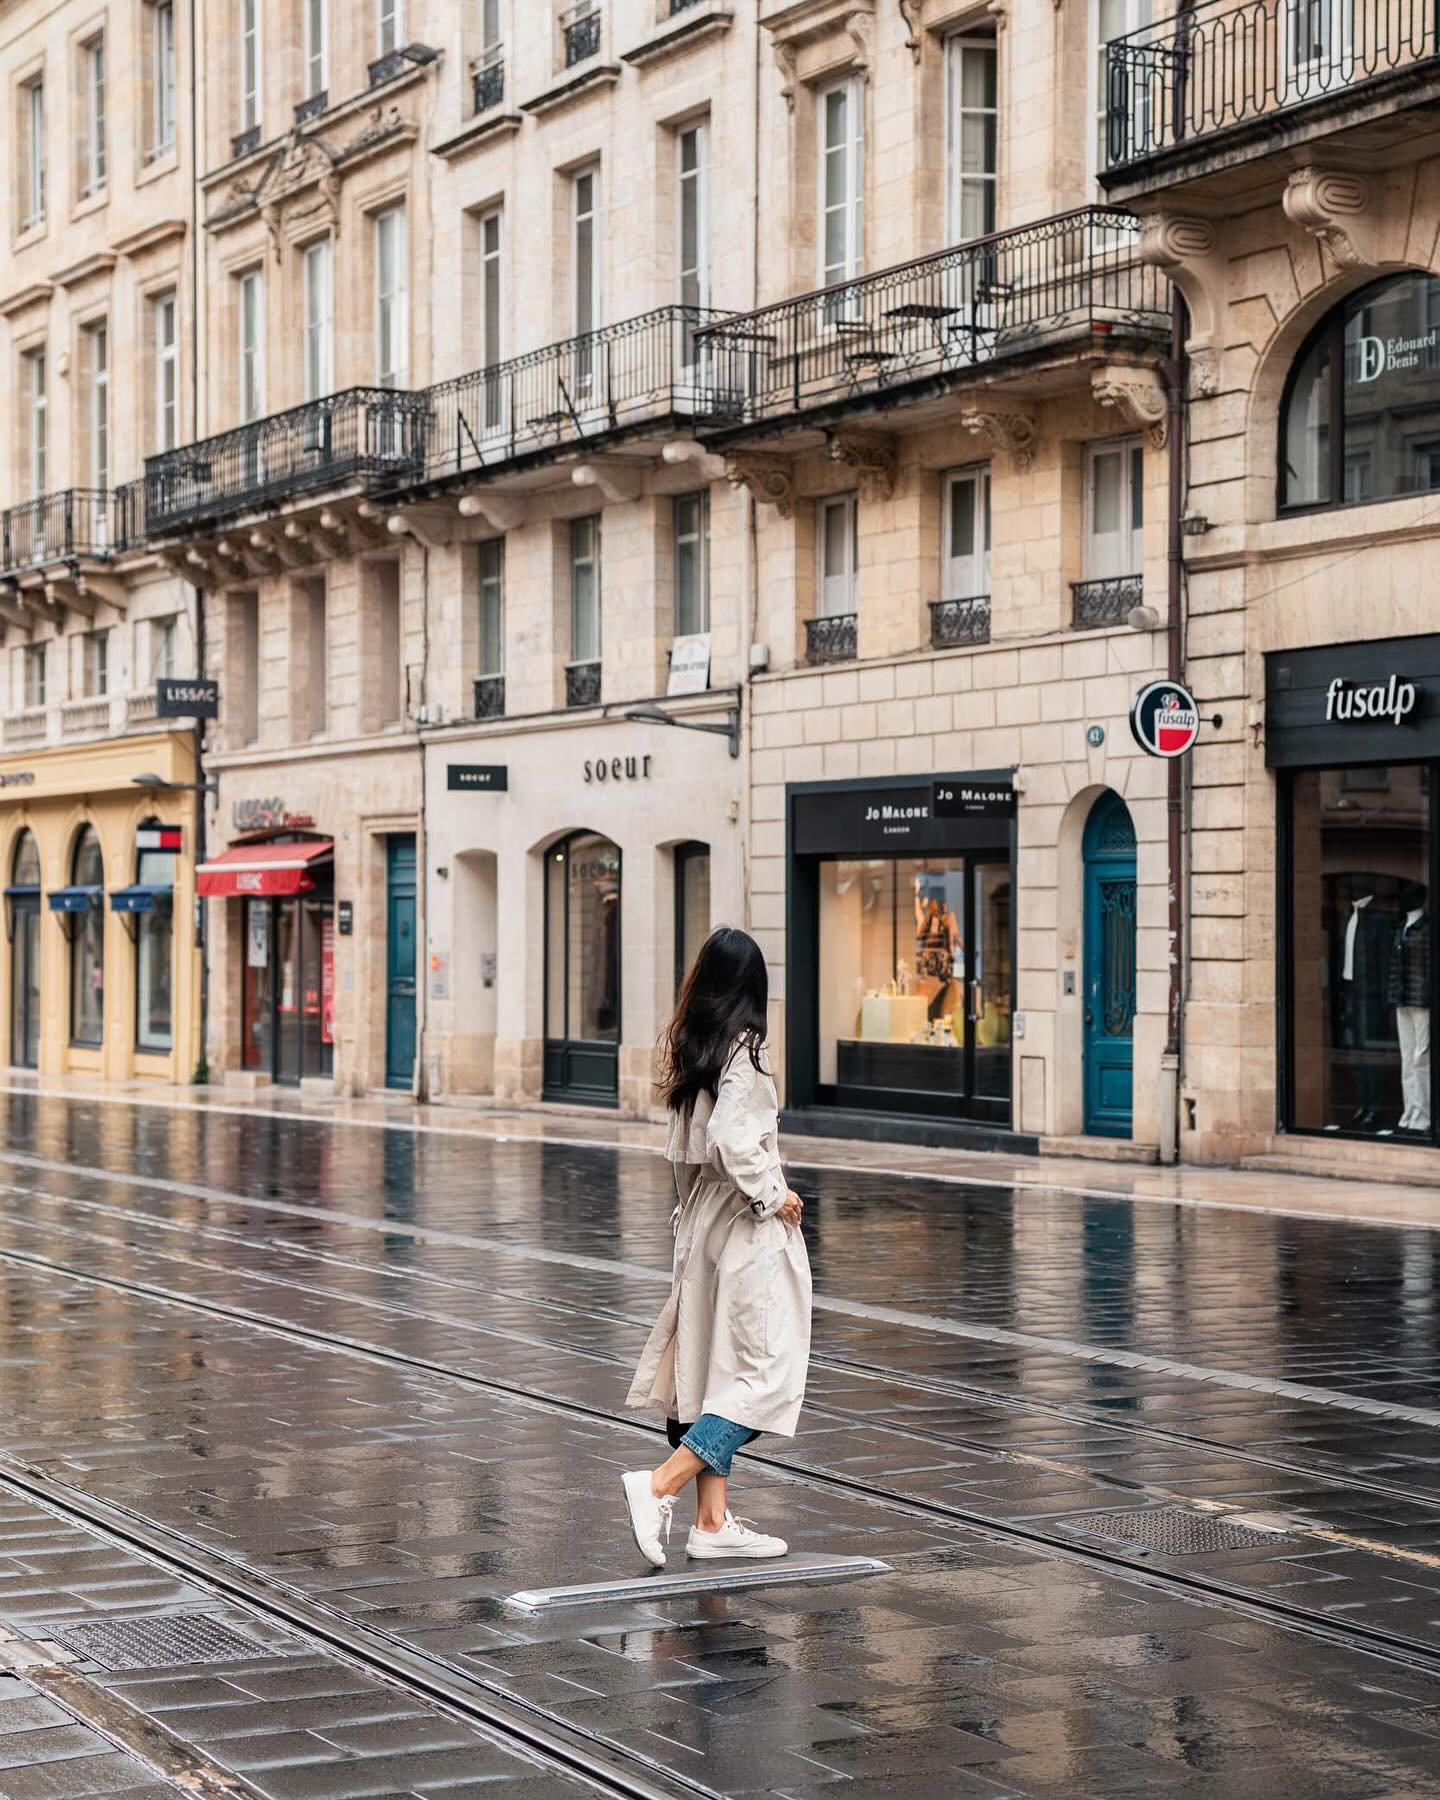 Rainy days were always better in France 🌧️ 
&mdash;
#HYWoutofHK #HYWinFRANCE